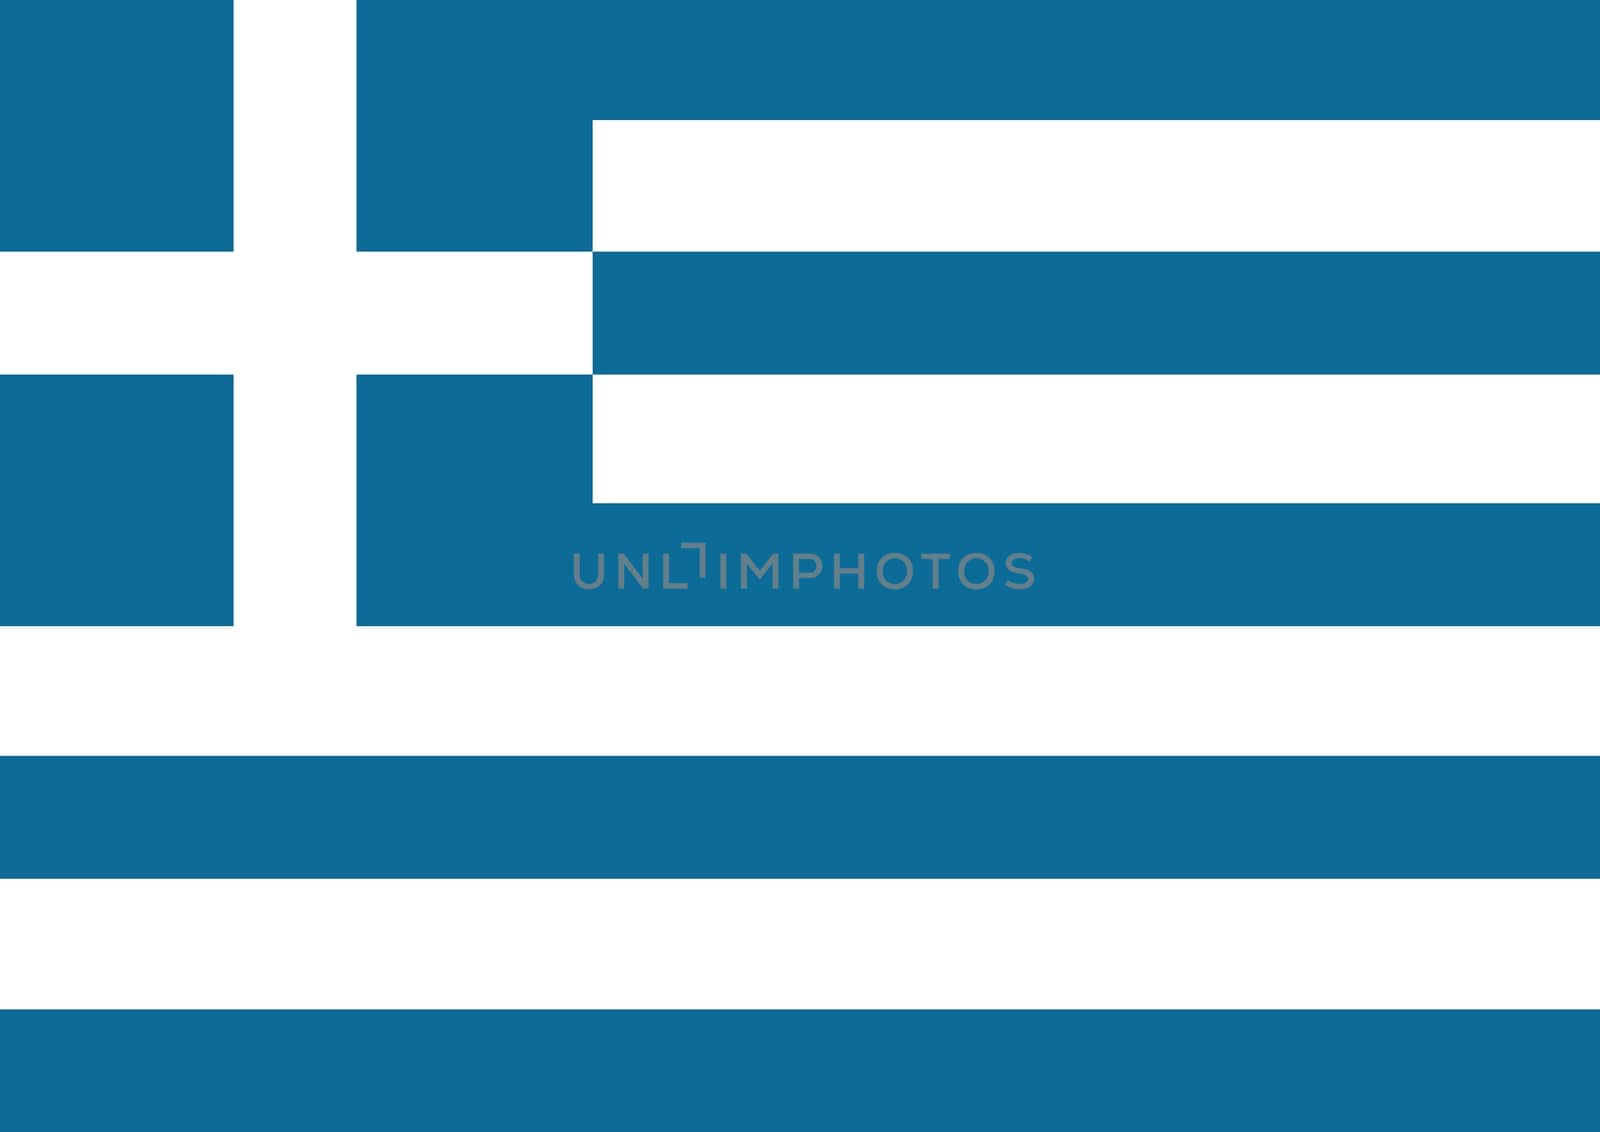 Illustration of the flag of Greece